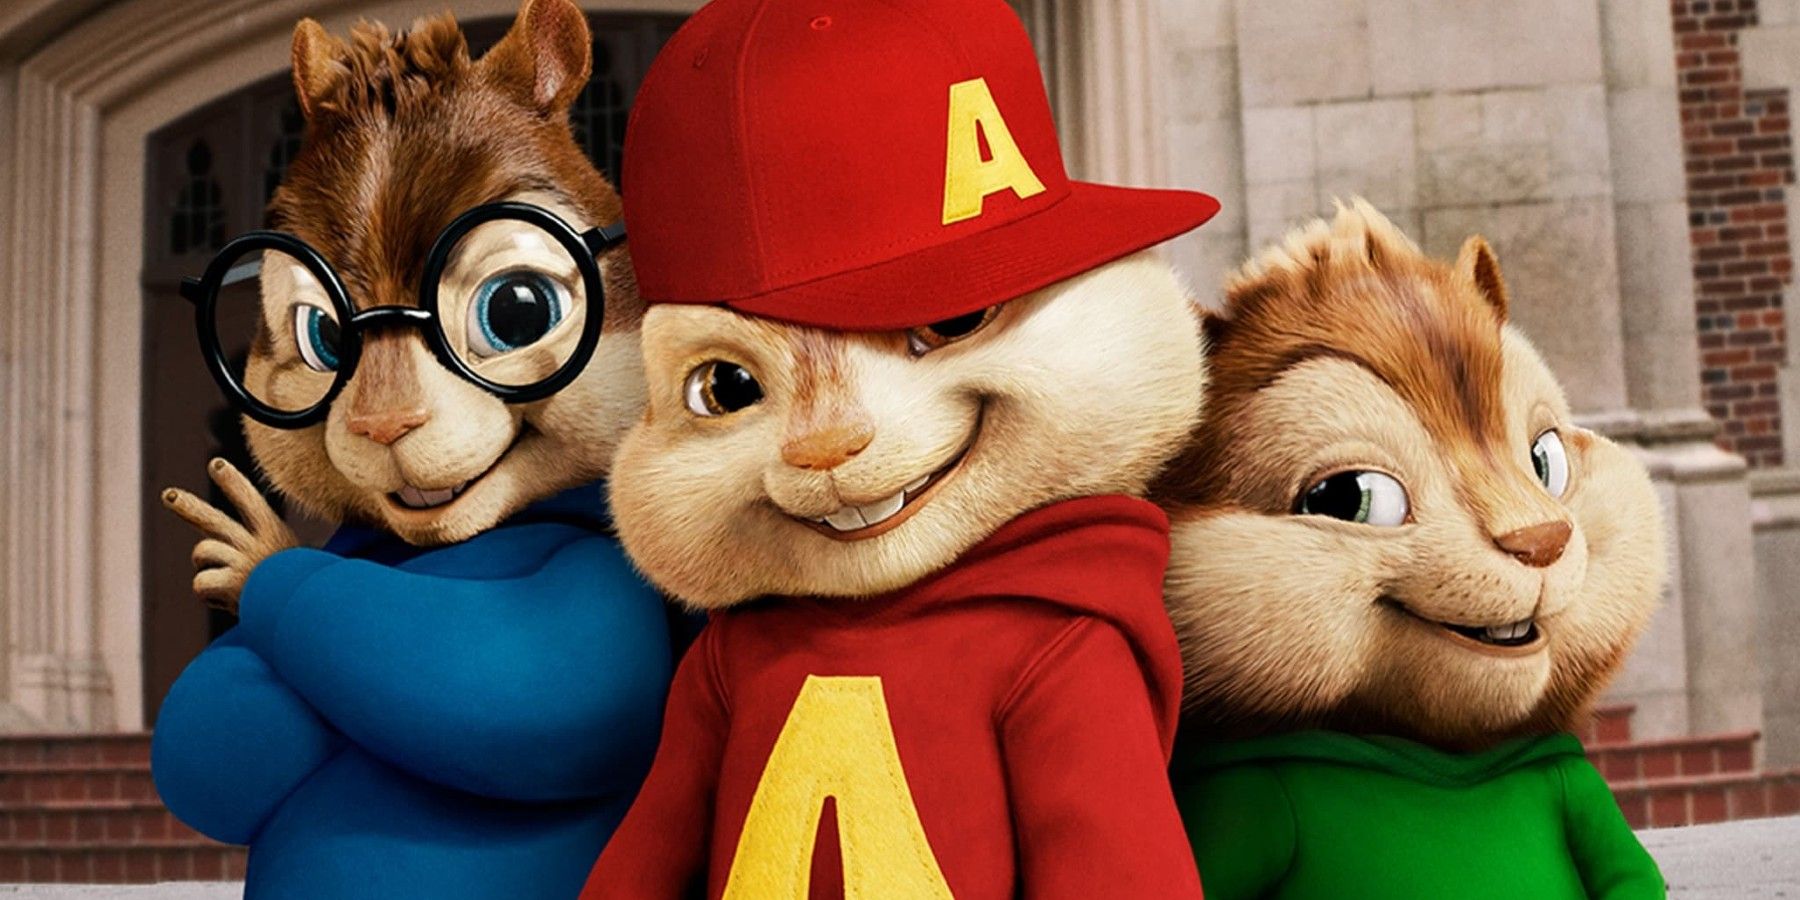 Alvin and the Chipmunks 2 the Squakquel promotional image of the chipmunks smiling at the camera.